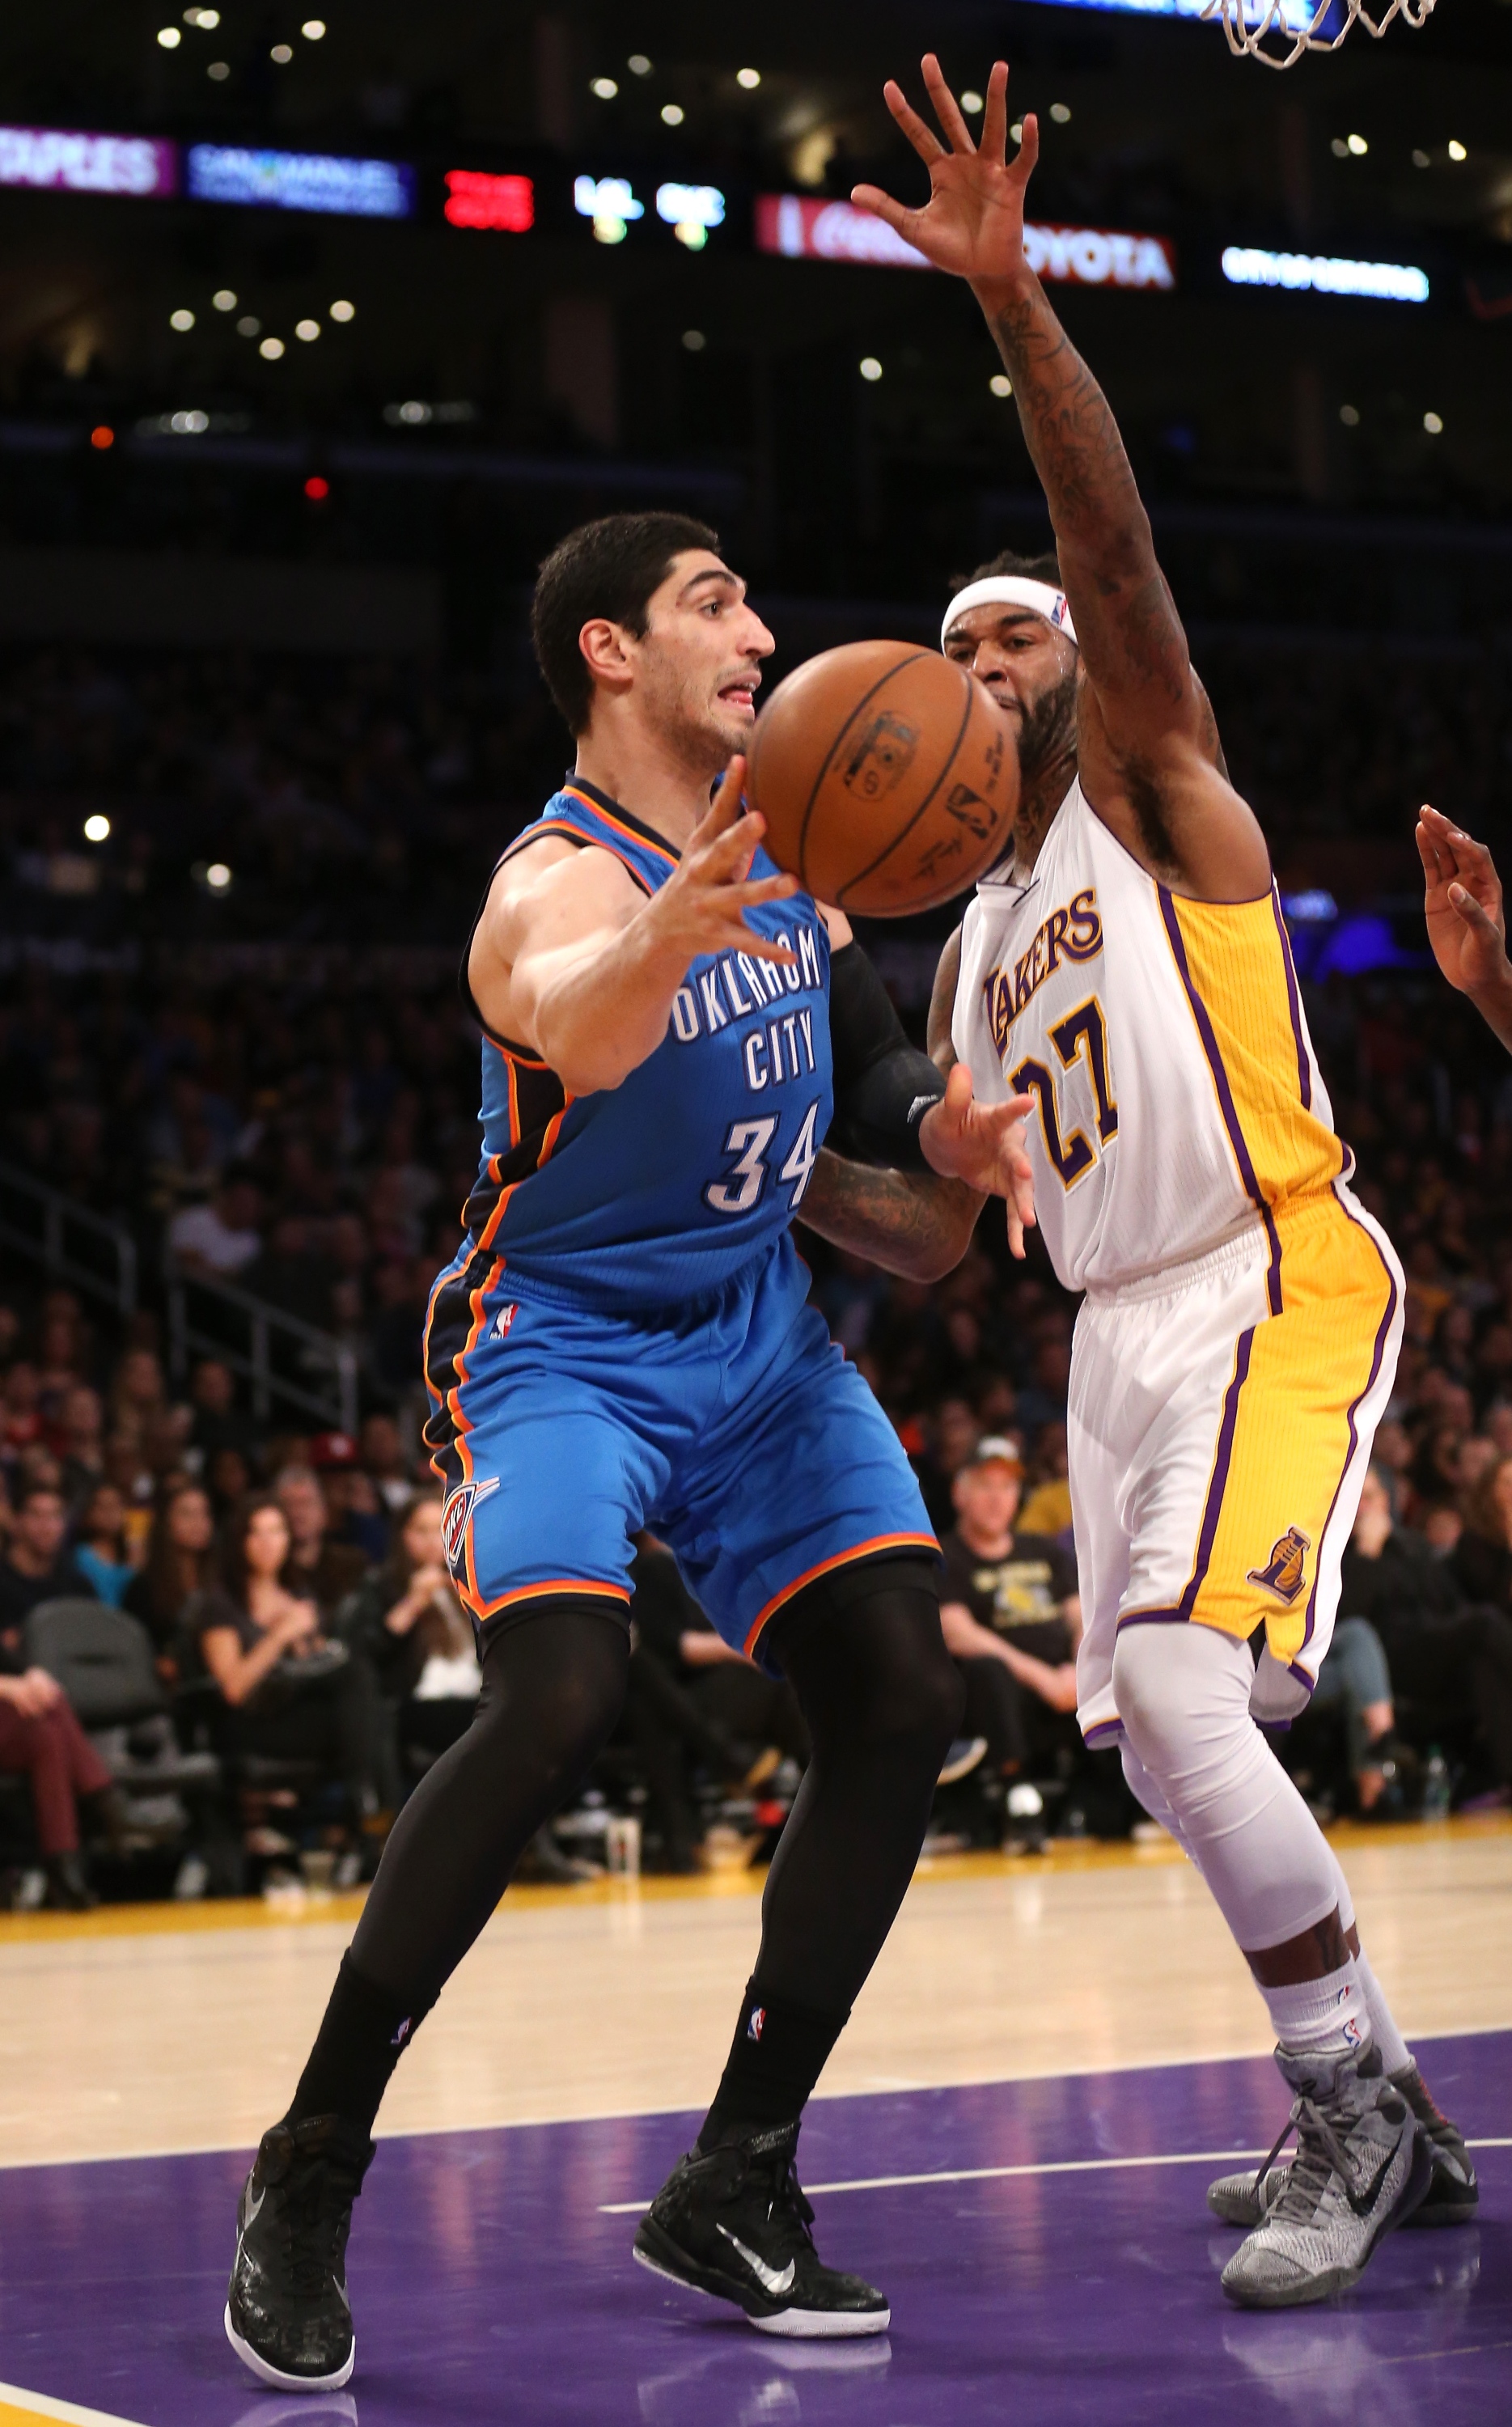 LOS ANGELES, CA - MARCH 01:  Enes Kanter #34 of the Oklahoma City Thunder throws a pass around  Jordan Hill #27 f the Los Angeles Lakers at Staples Center on March 1, 2015 in Los Angeles, California.   NOTE TO USER: User expressly acknowledges and agrees that, by downloading and or using this photograph, User is consenting to the terms and conditions of the Getty Images License Agreement.  (Photo by Stephen Dunn/Getty Images)